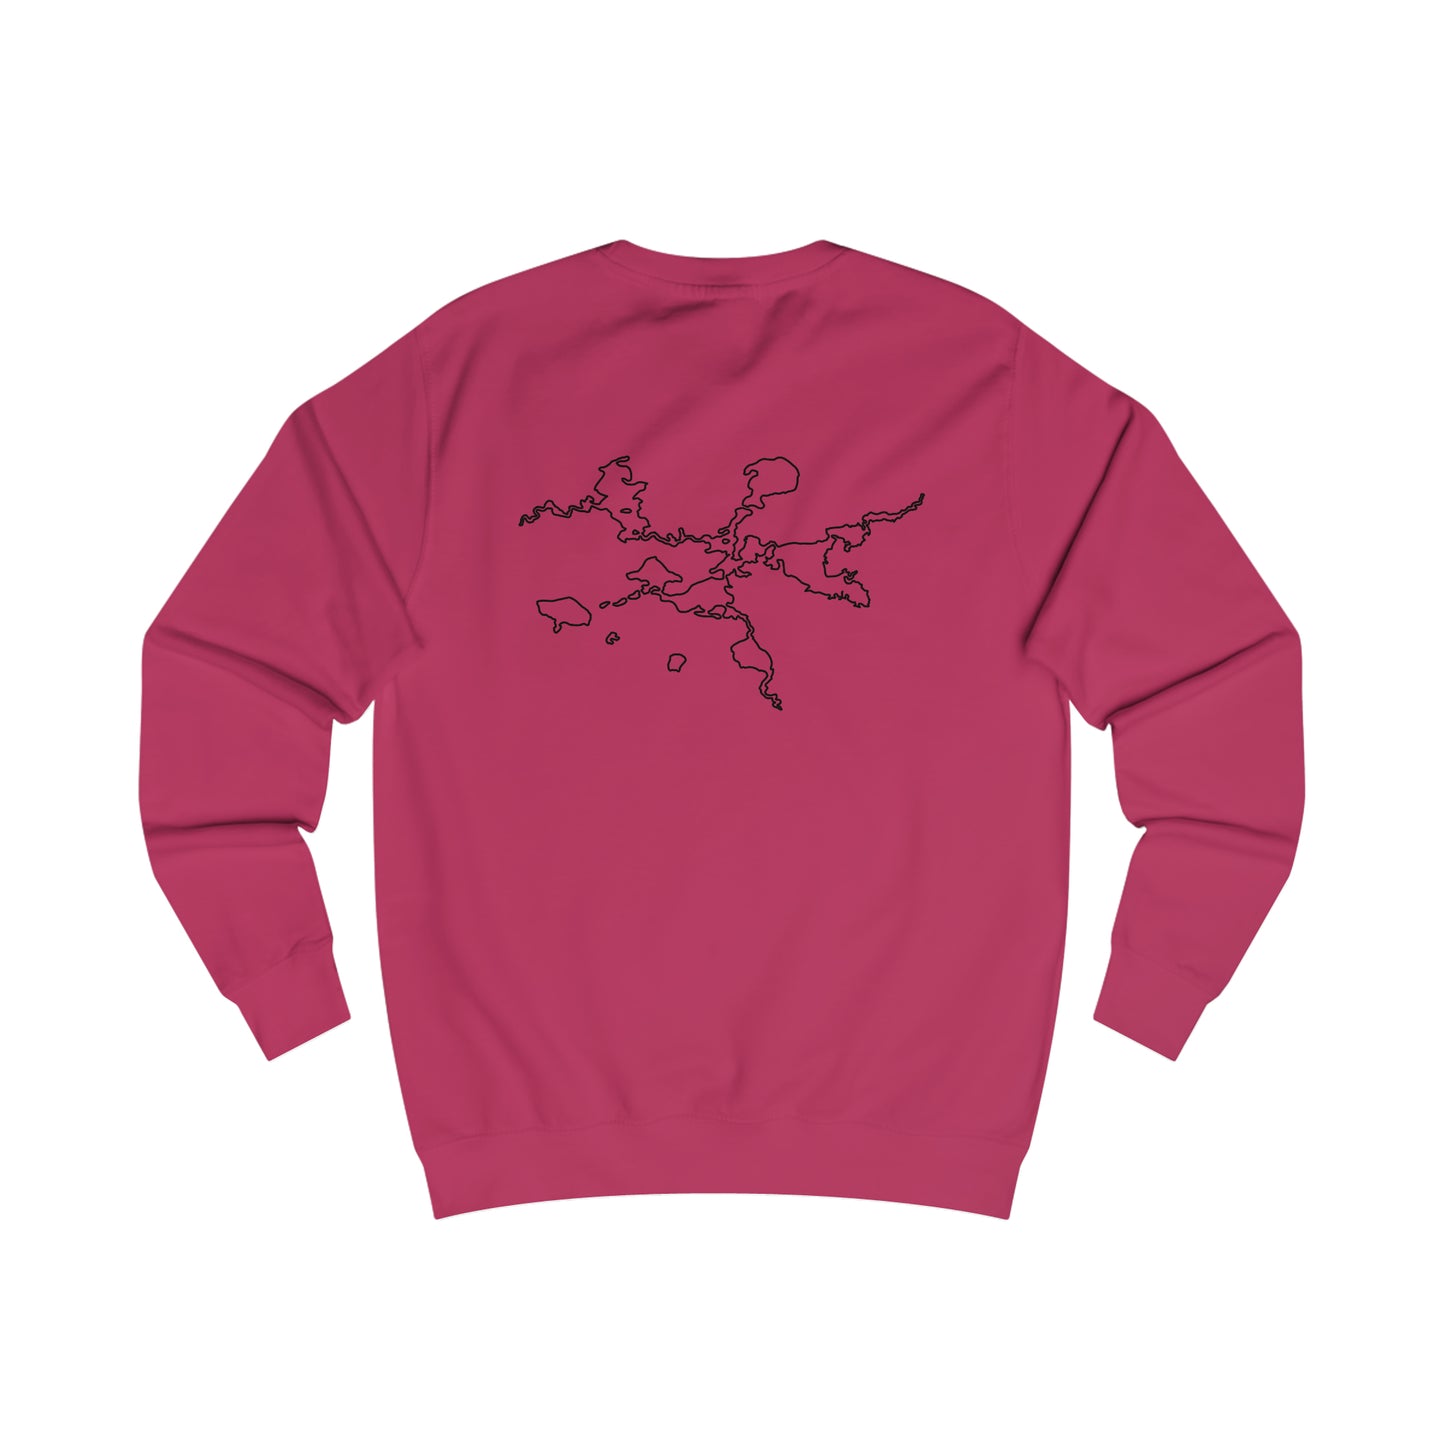 Manitowish Waters with Back Outline - Men's Crewneck